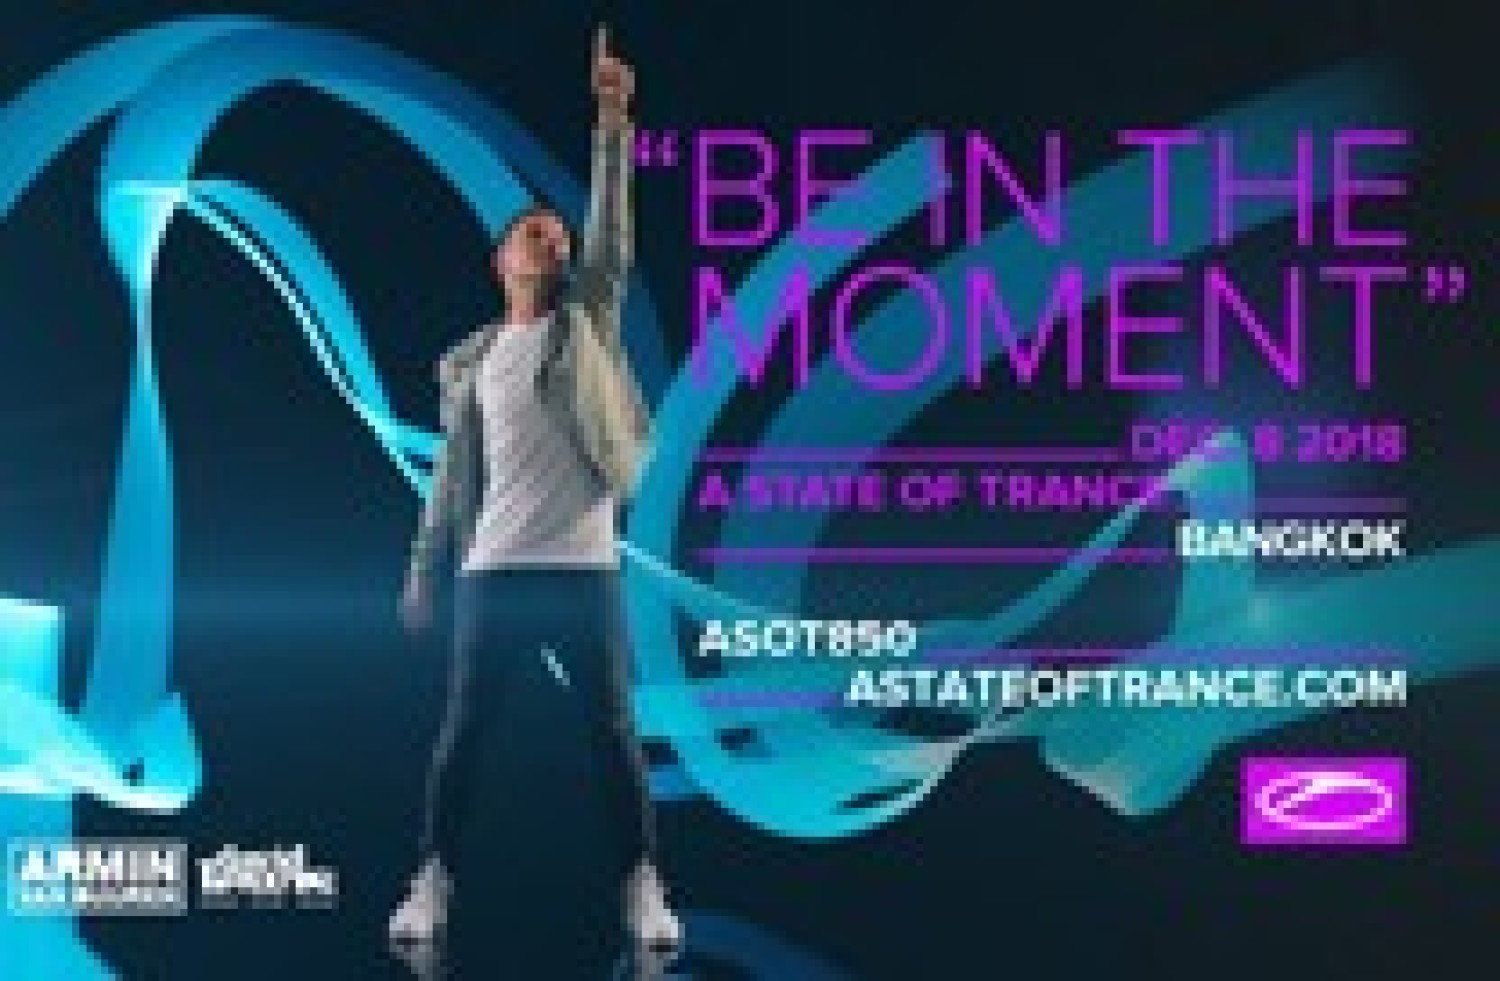 Party report: A State of Trance 850, Bangkok (TH) (08-12-2018)